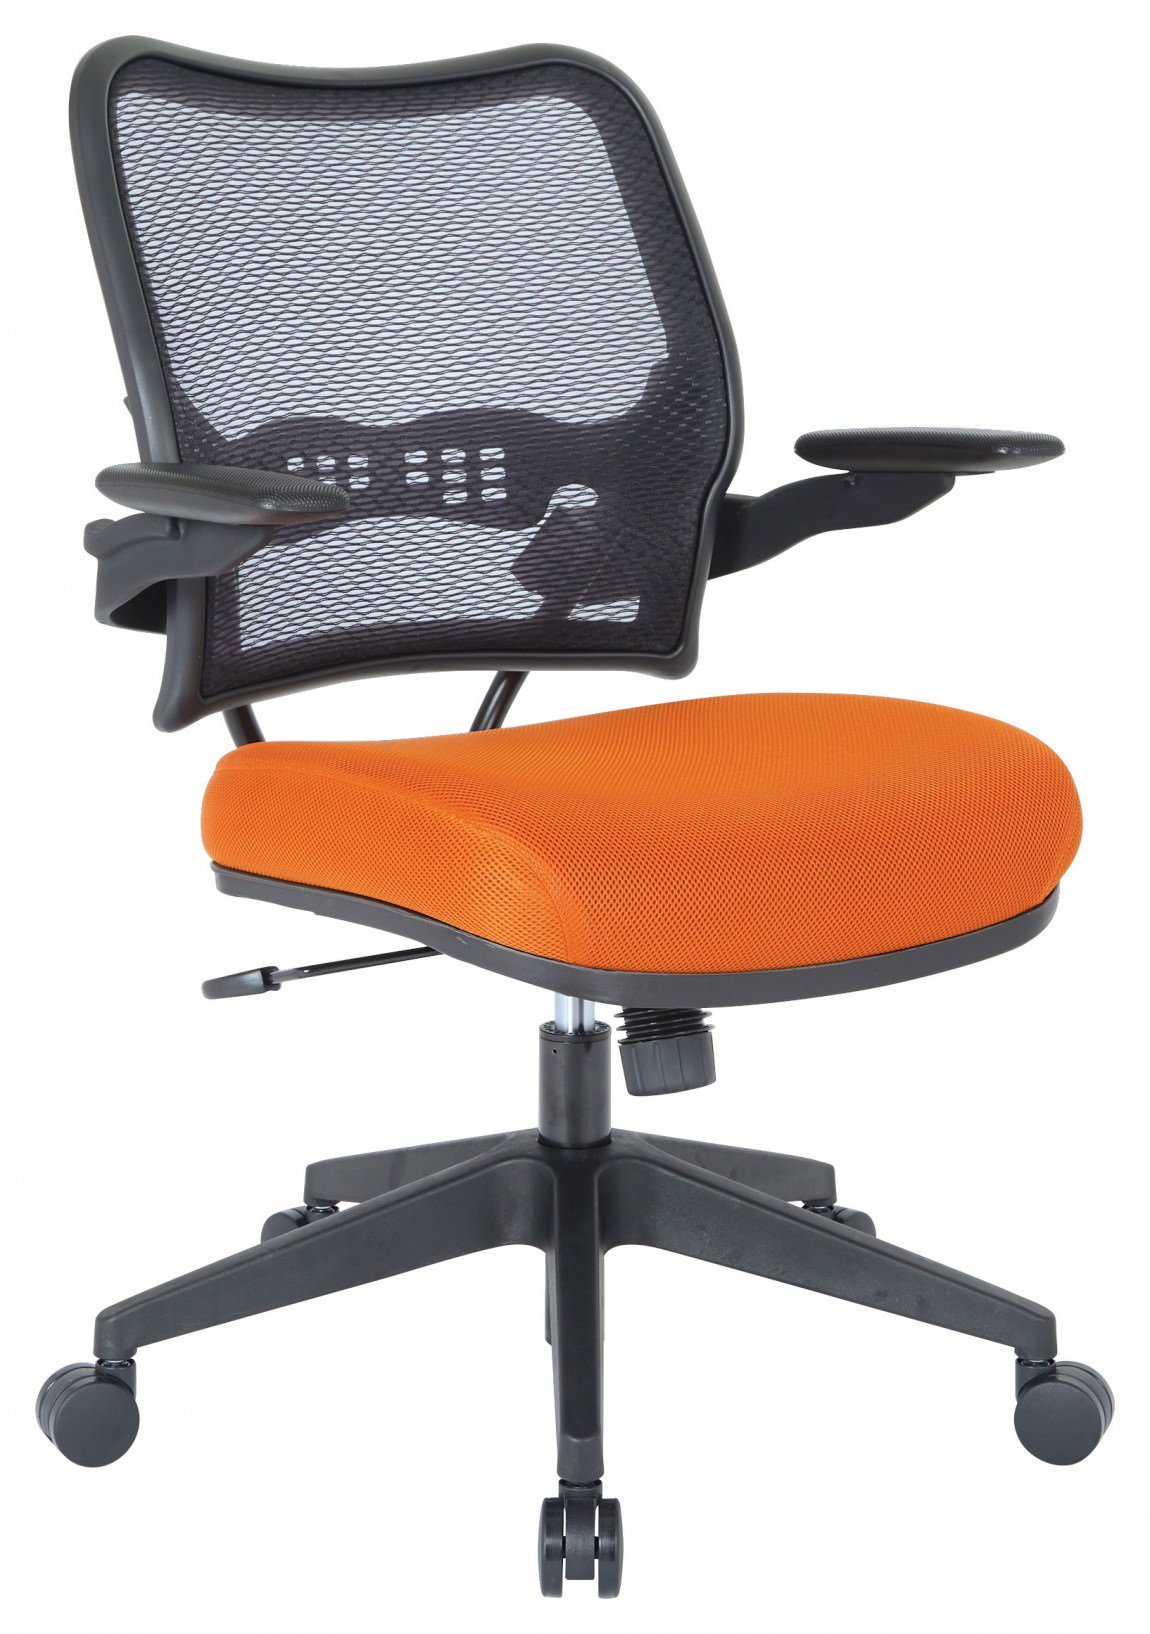 Orange Mesh Back Office Chair 28.5 x 24 x 37.75-41.75 : 13-37N1P3-___ -  Space Seating by Office Star Products